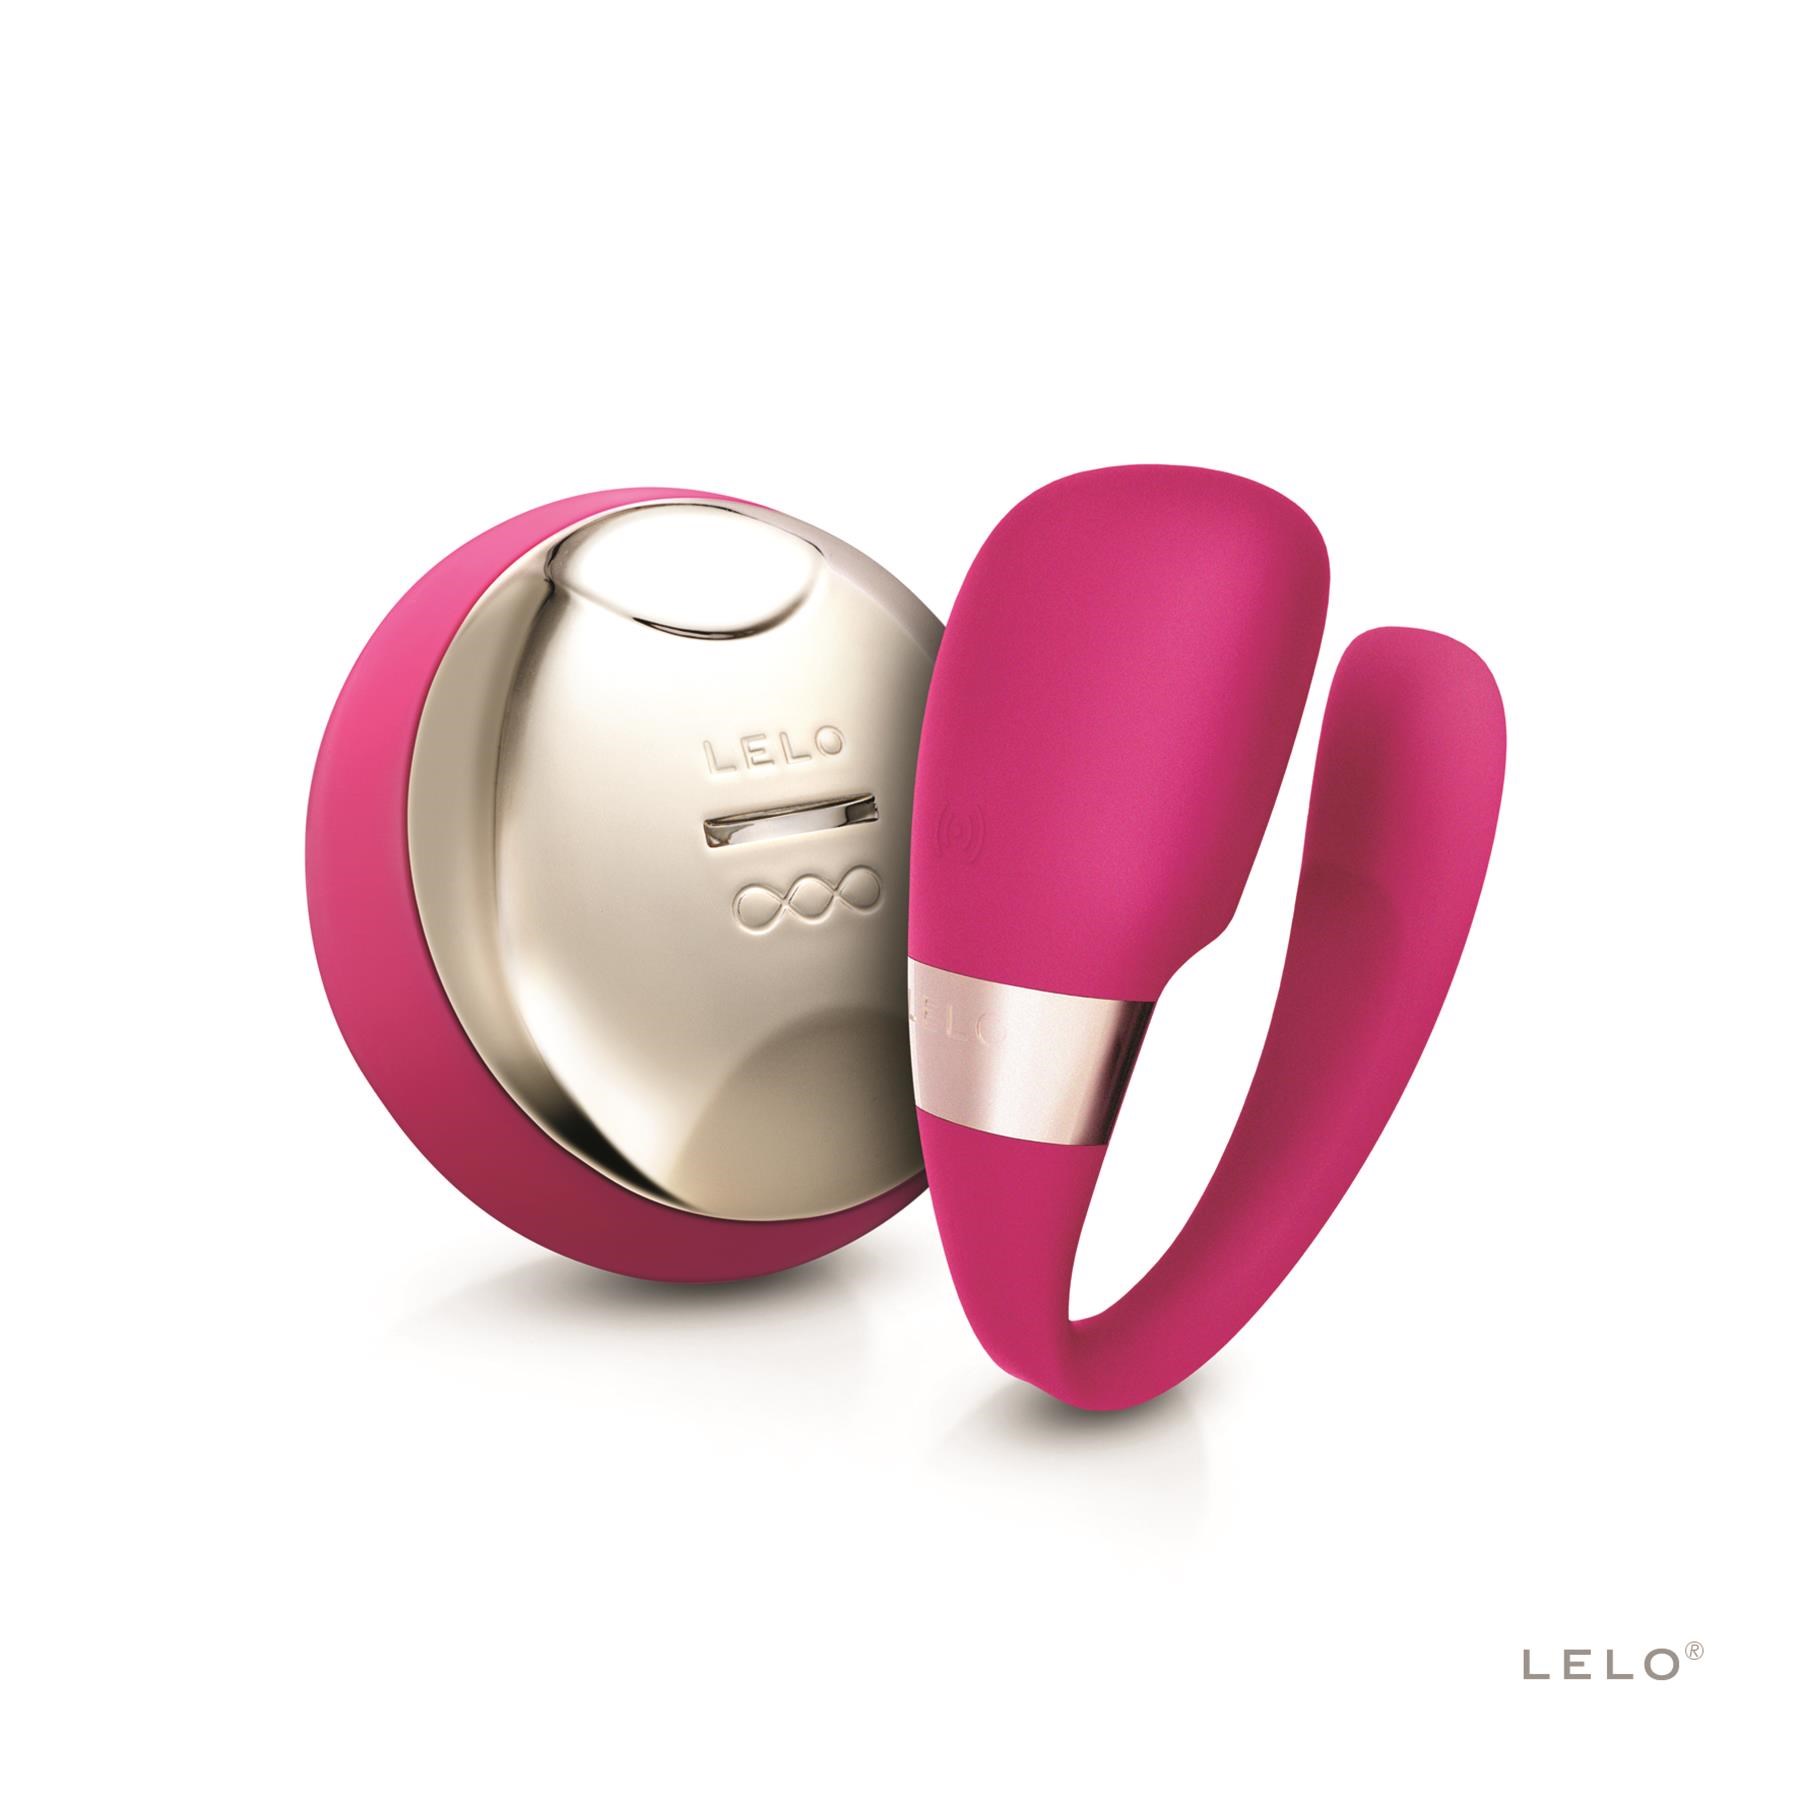 Lelo Tiani 3 Remote Control Couples Massager Product Shot